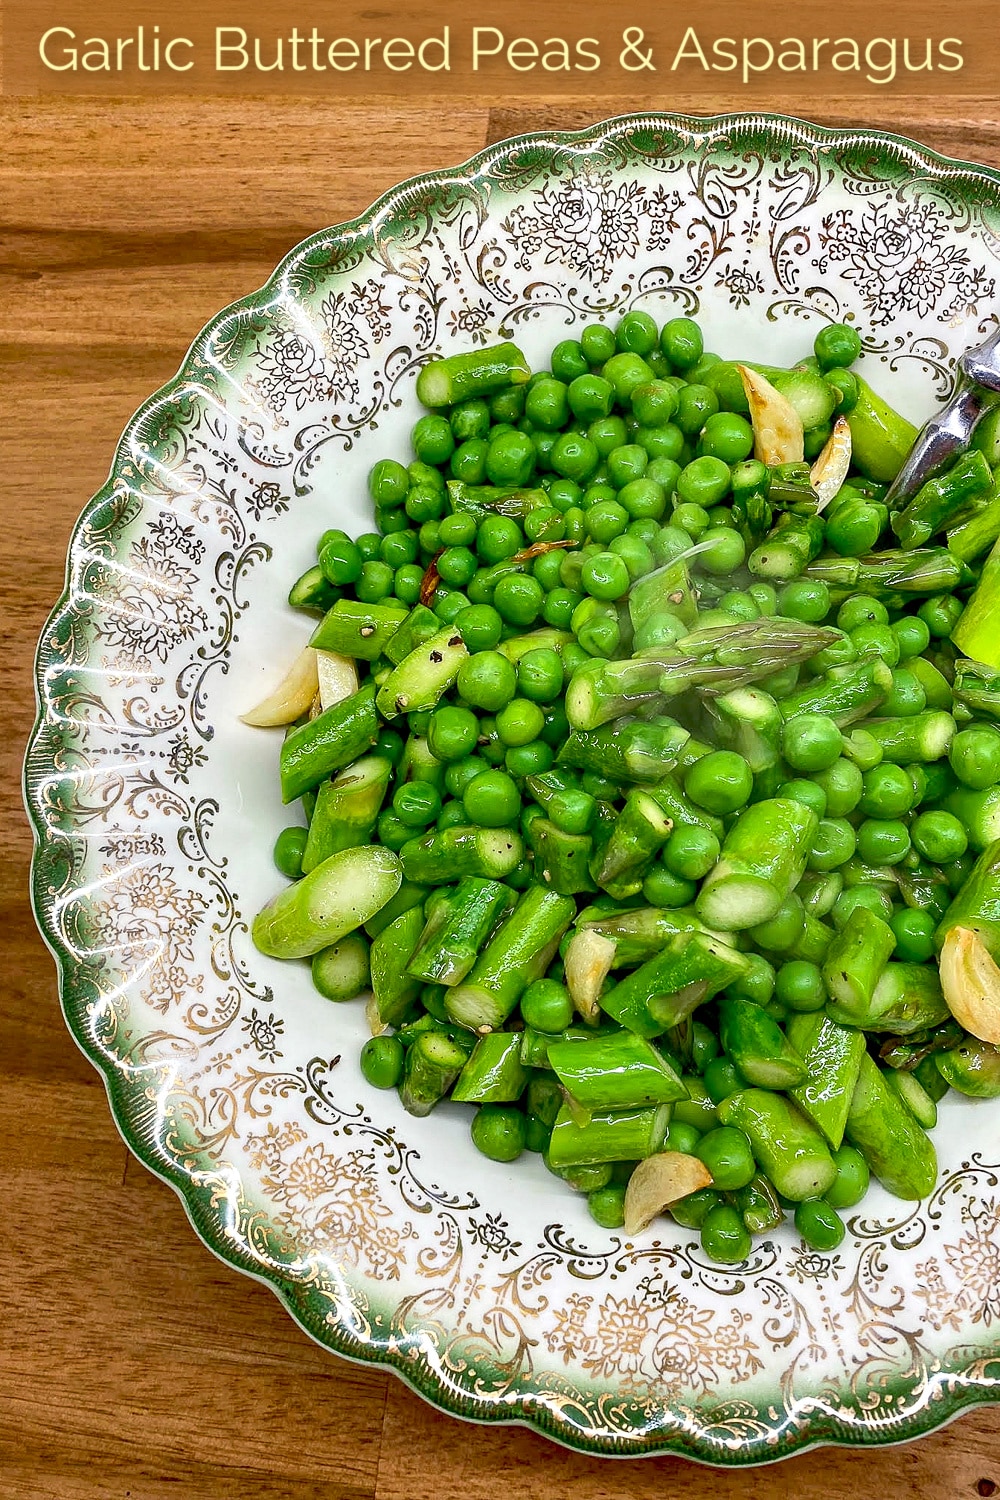 Garlic Buttered Peas and Asparagus with title text added for Pinterest